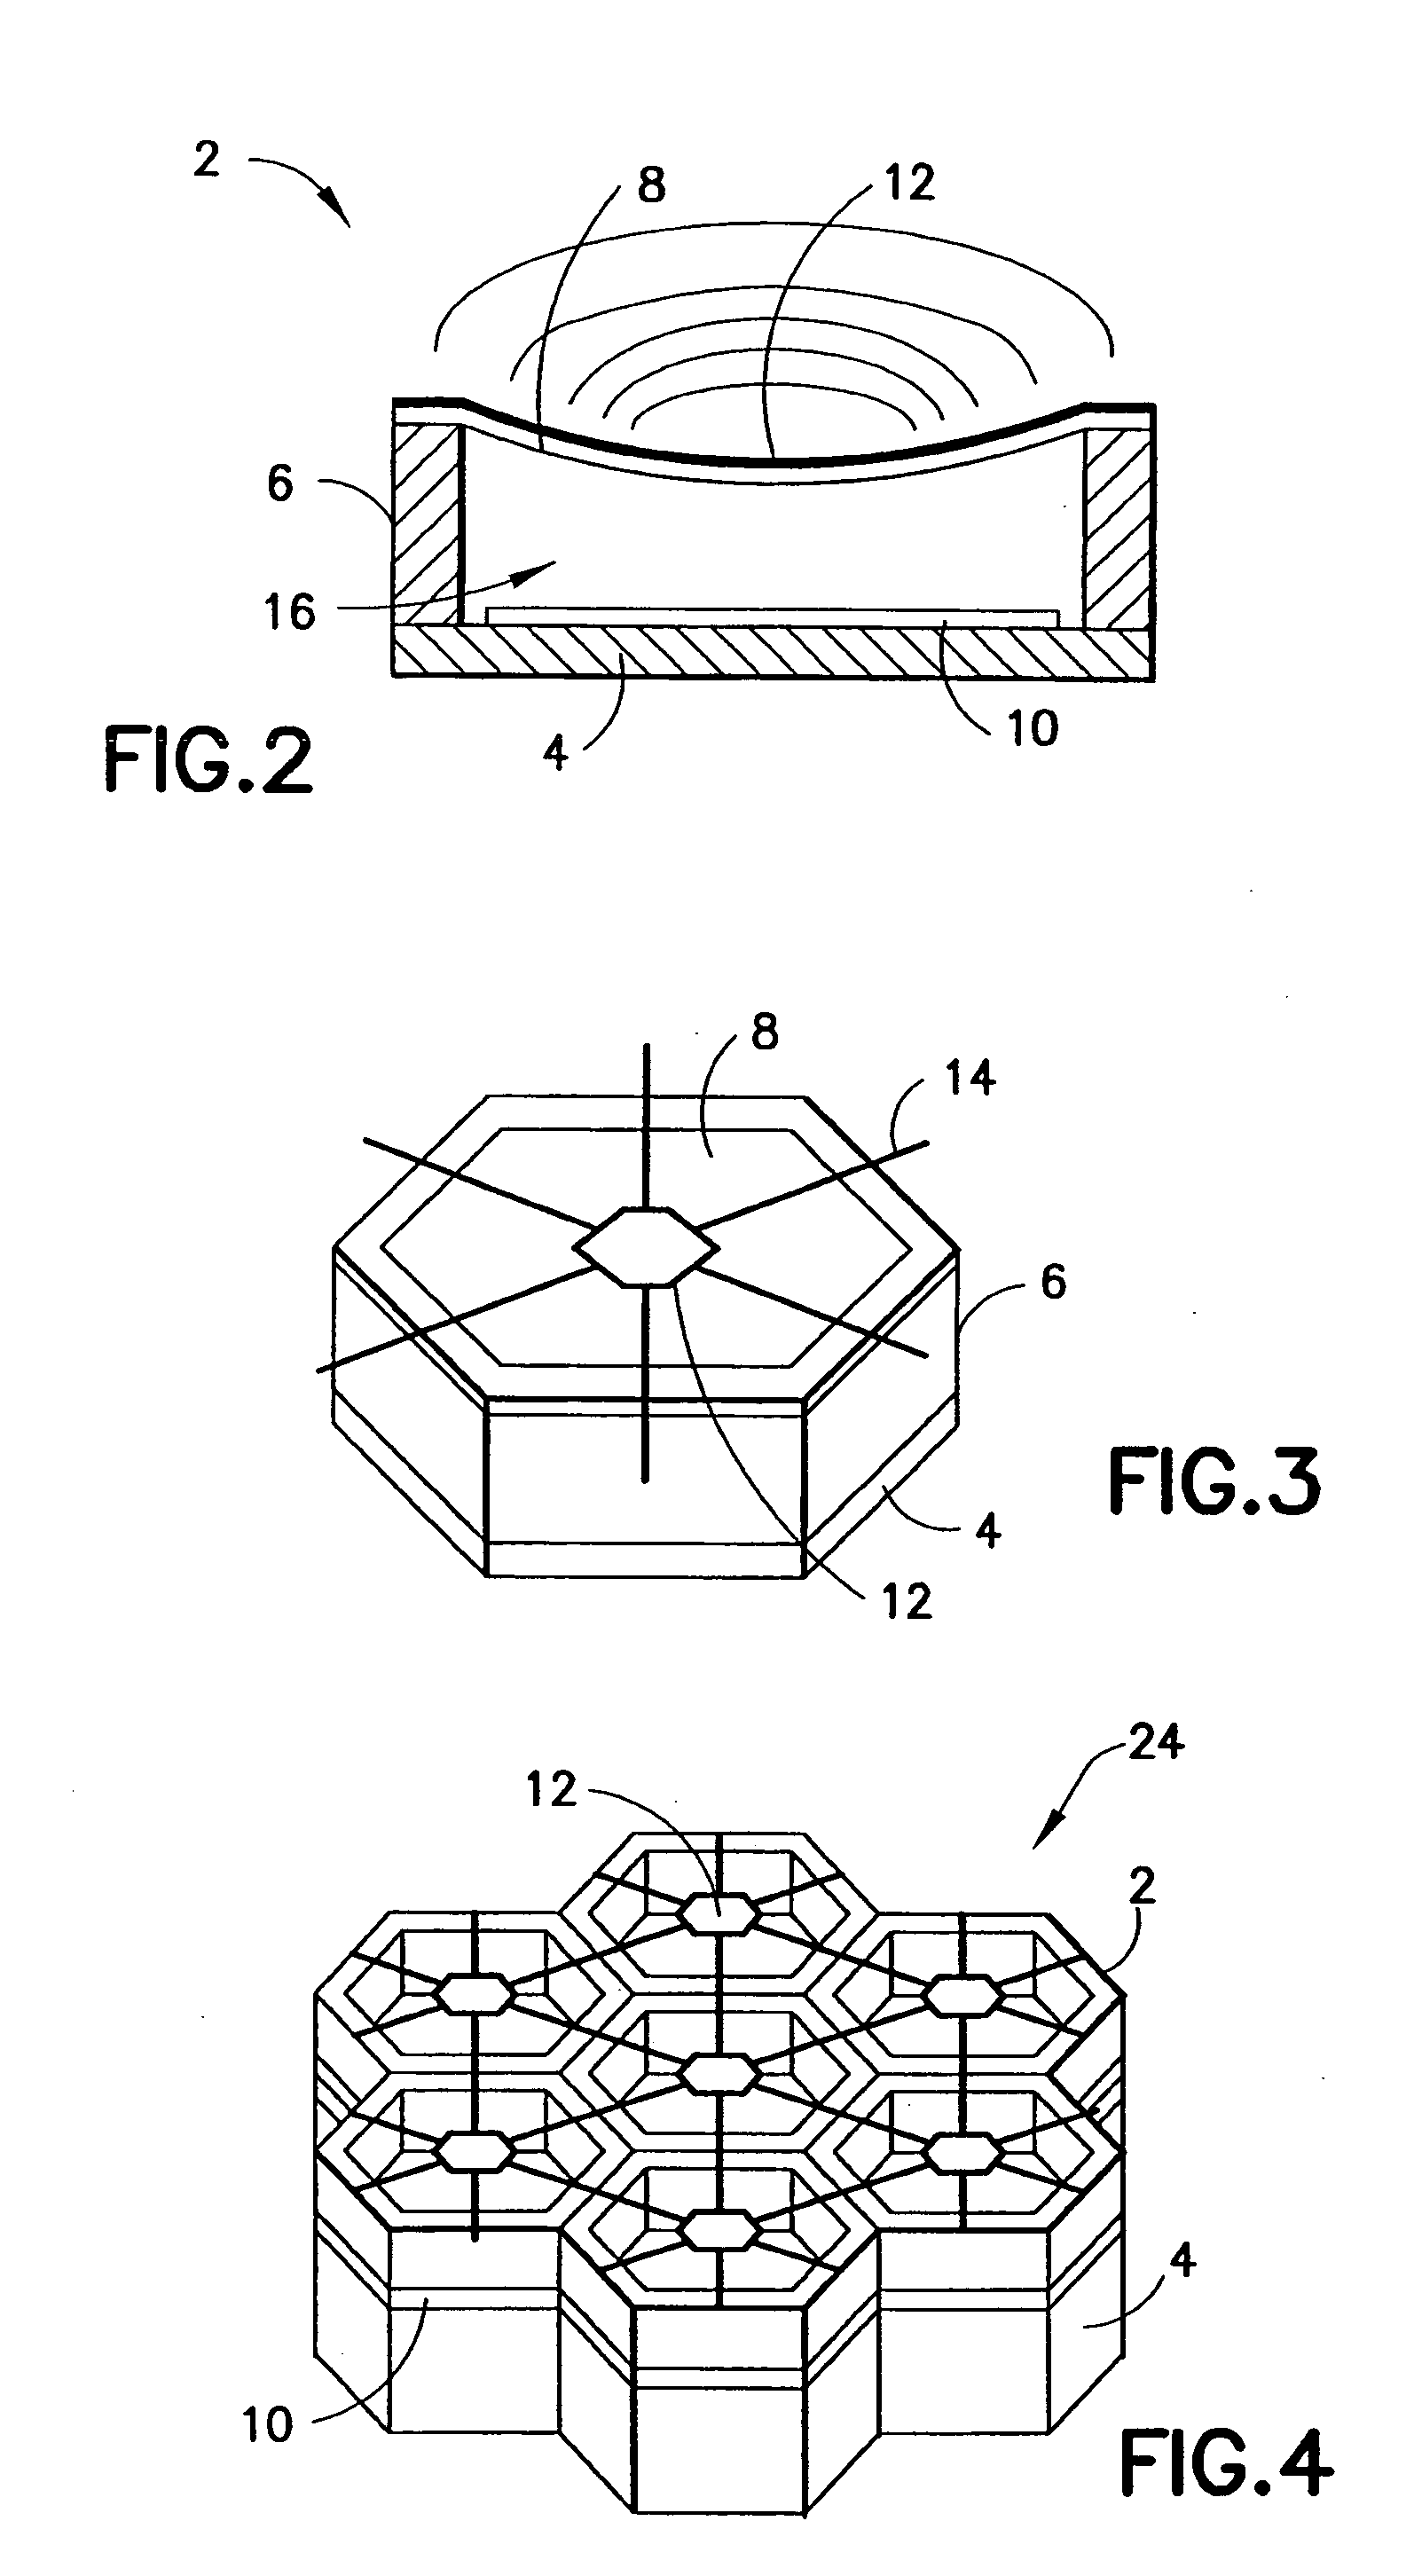 Method and apparatus for non-invasive ultrasonic fetal heart rate monitoring